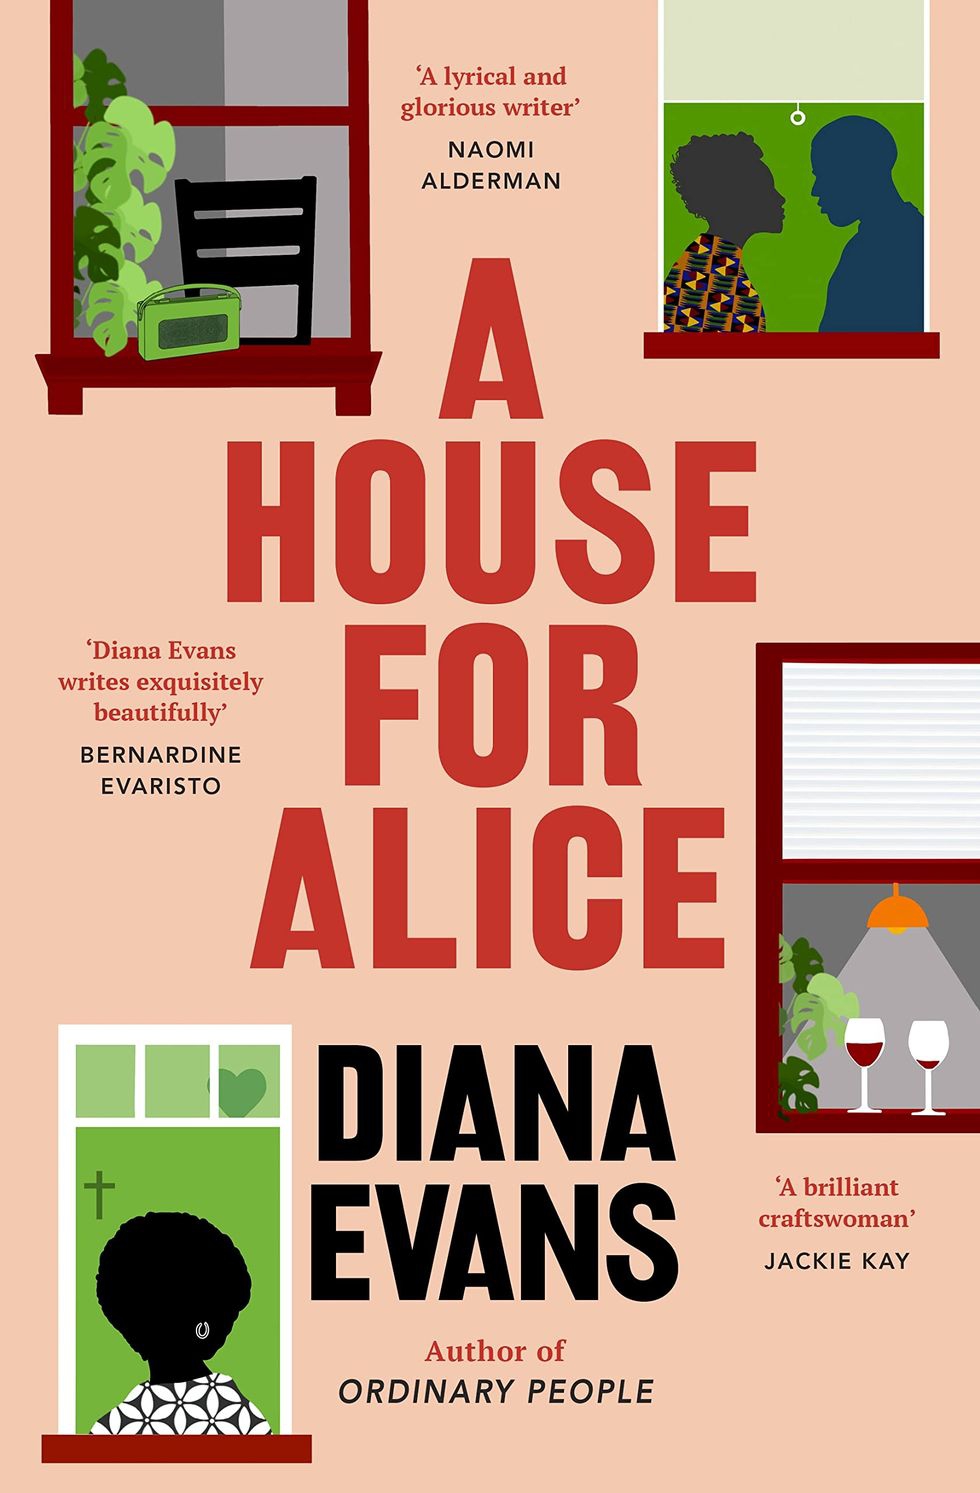 A House for Alice by  Diana Evans best fiction books 2023